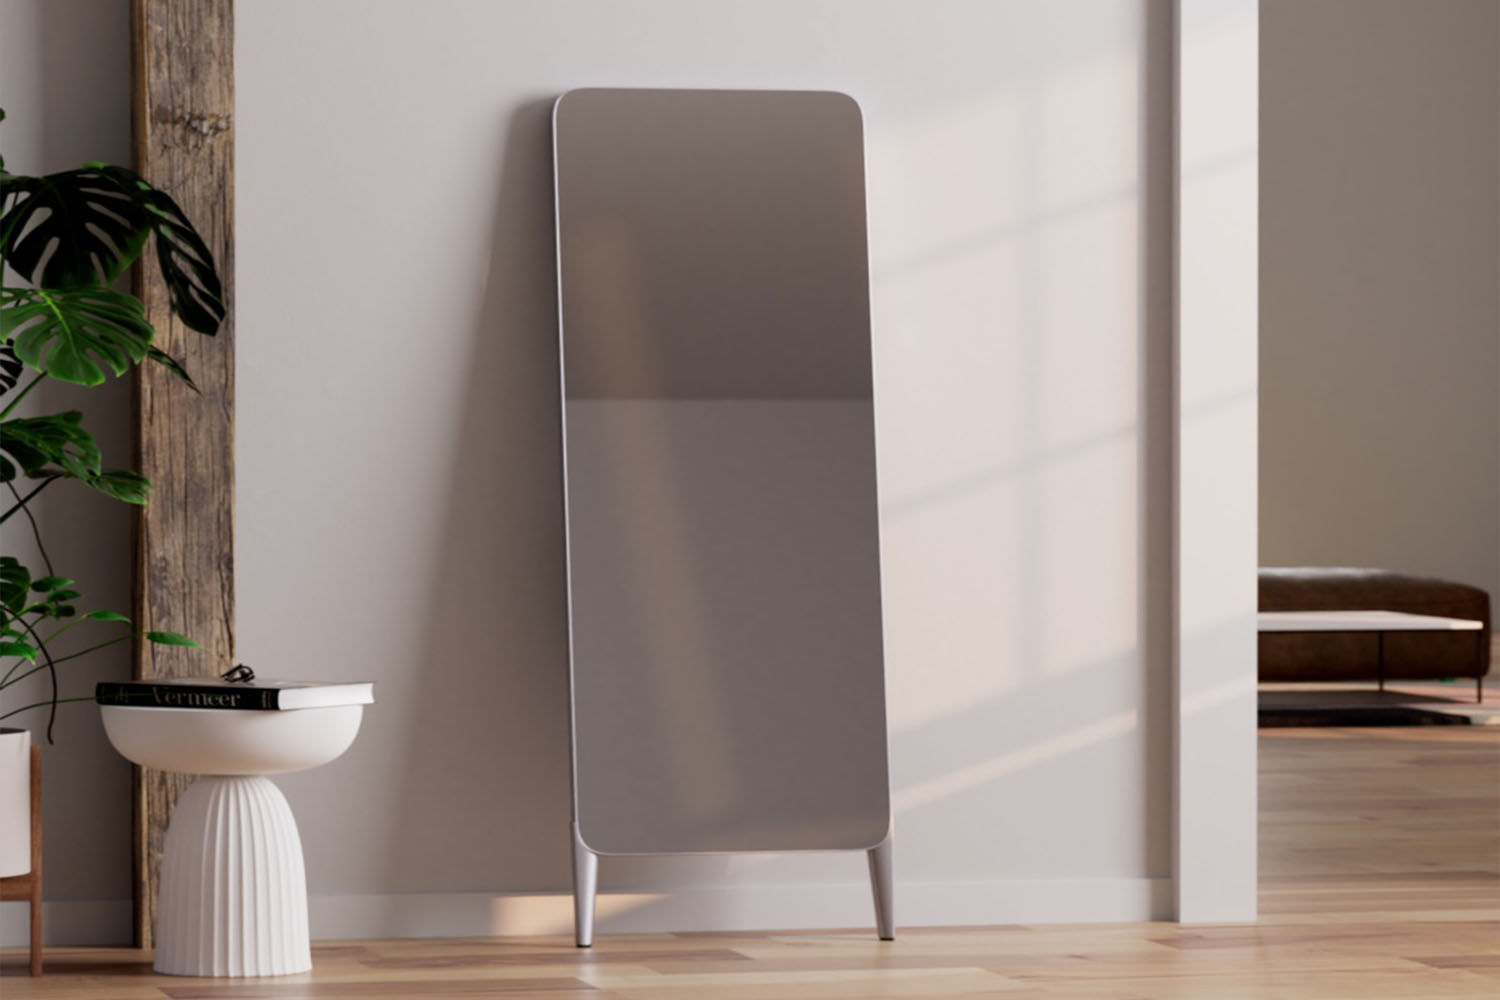 The FITURE Mini Interactive Fitness Mirror on a gray background